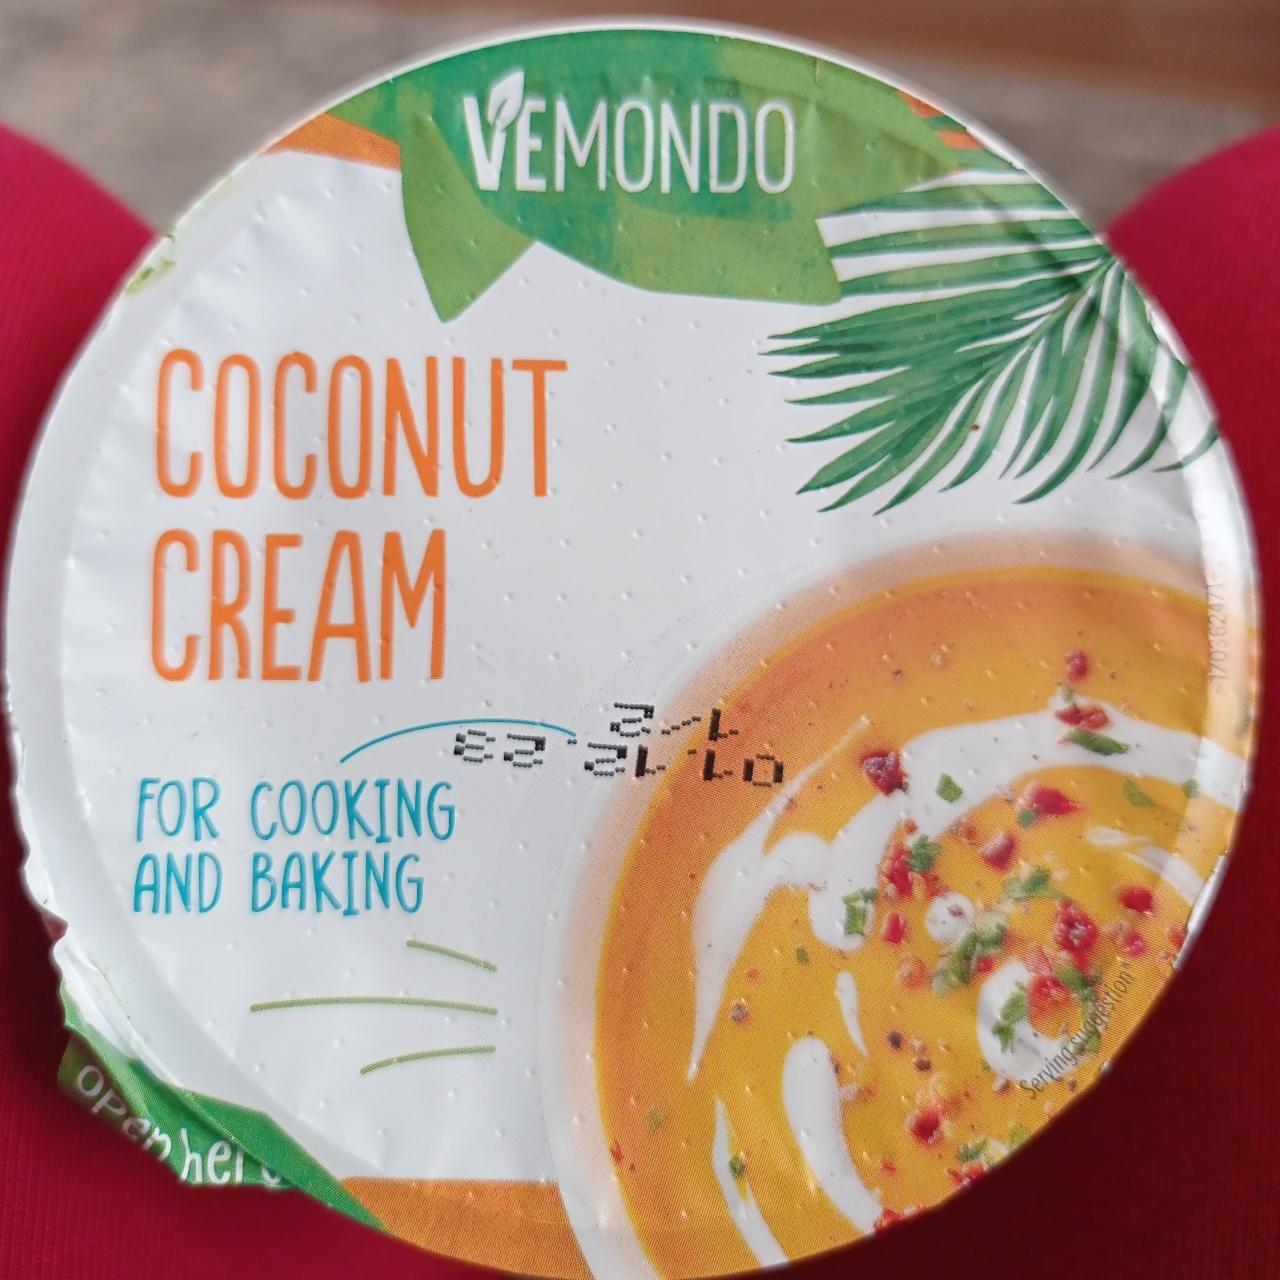 Képek - Coconut cream for cooking and baking Vemondo